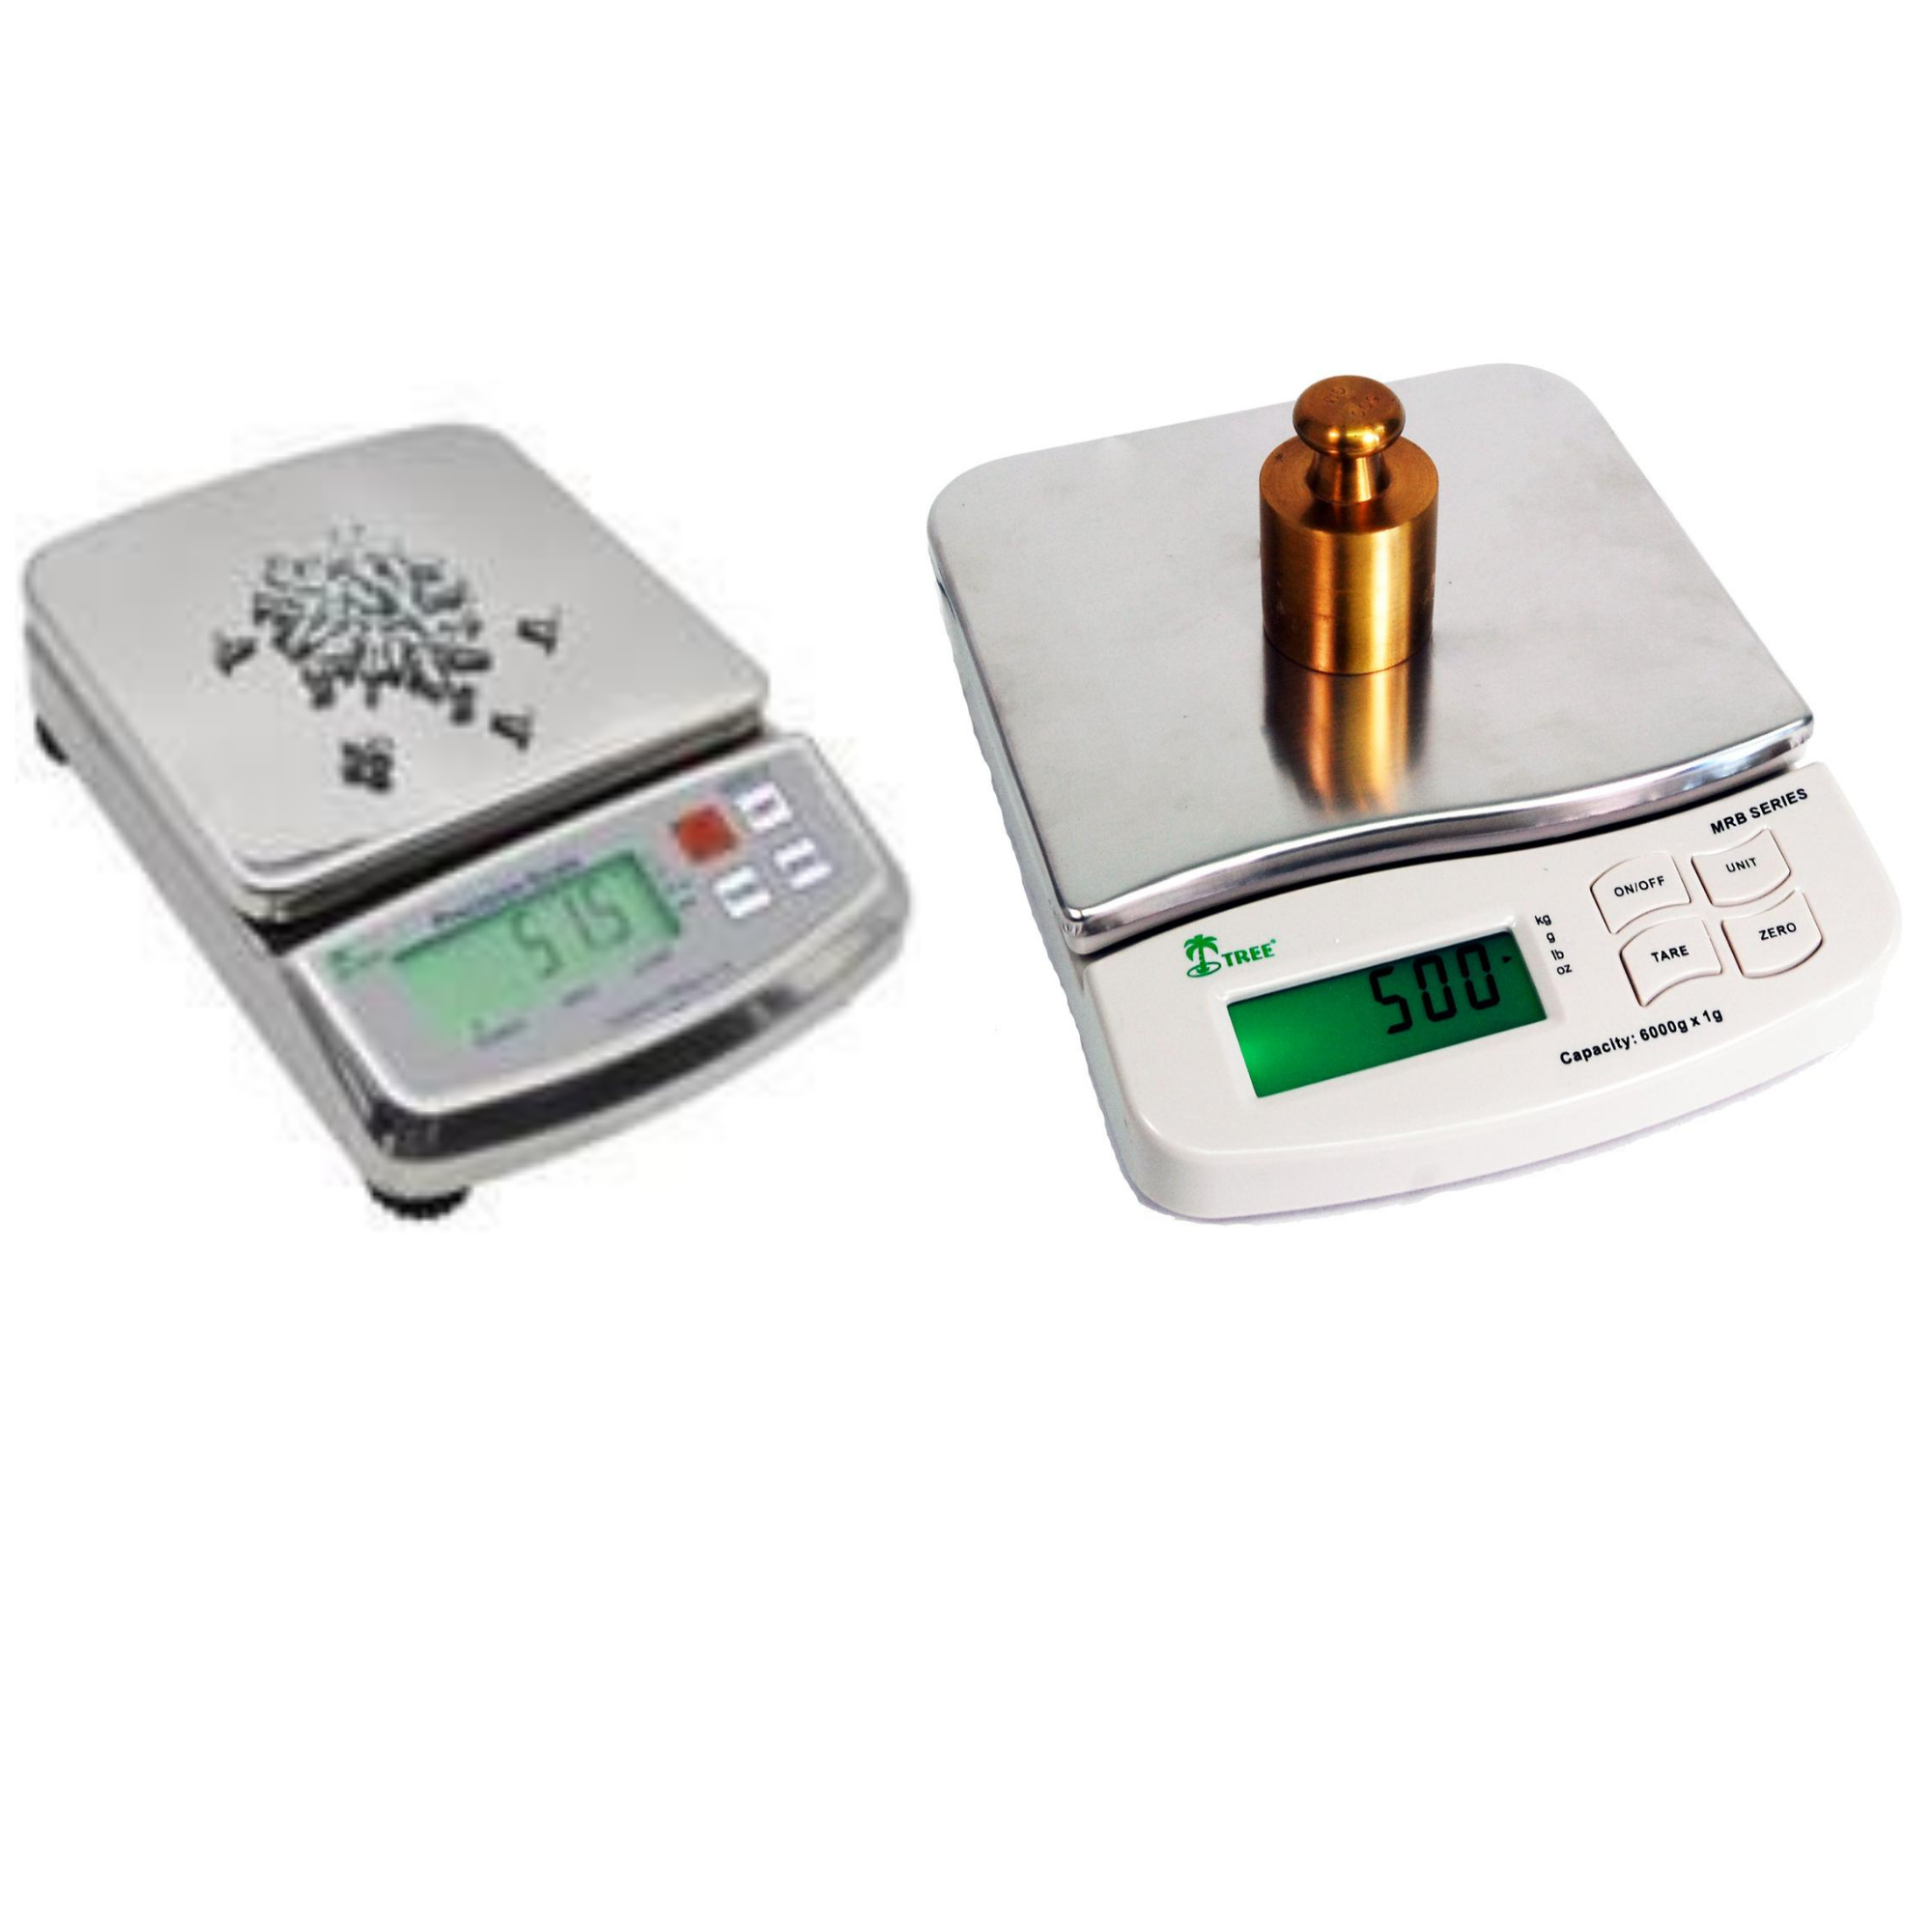 Tree MRB-S 5000 Stainless Steel Barista Coffee Scale, 5000 g x 1 g